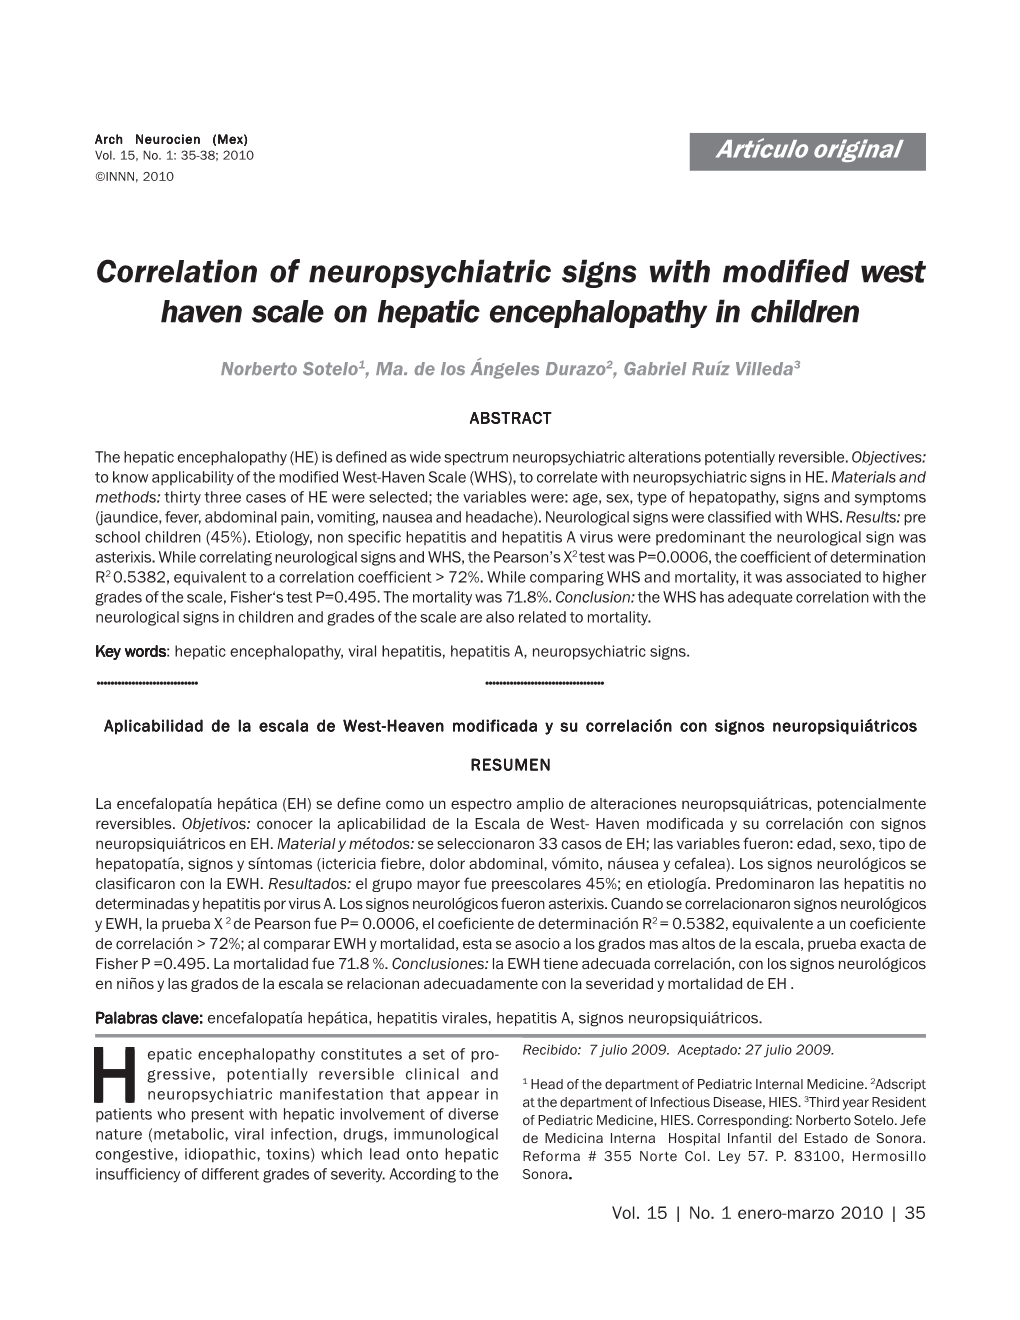 Correlation of Neuropsychiatric Signs with Modified West Haven Scale on Hepatic Encephalopathy in Children